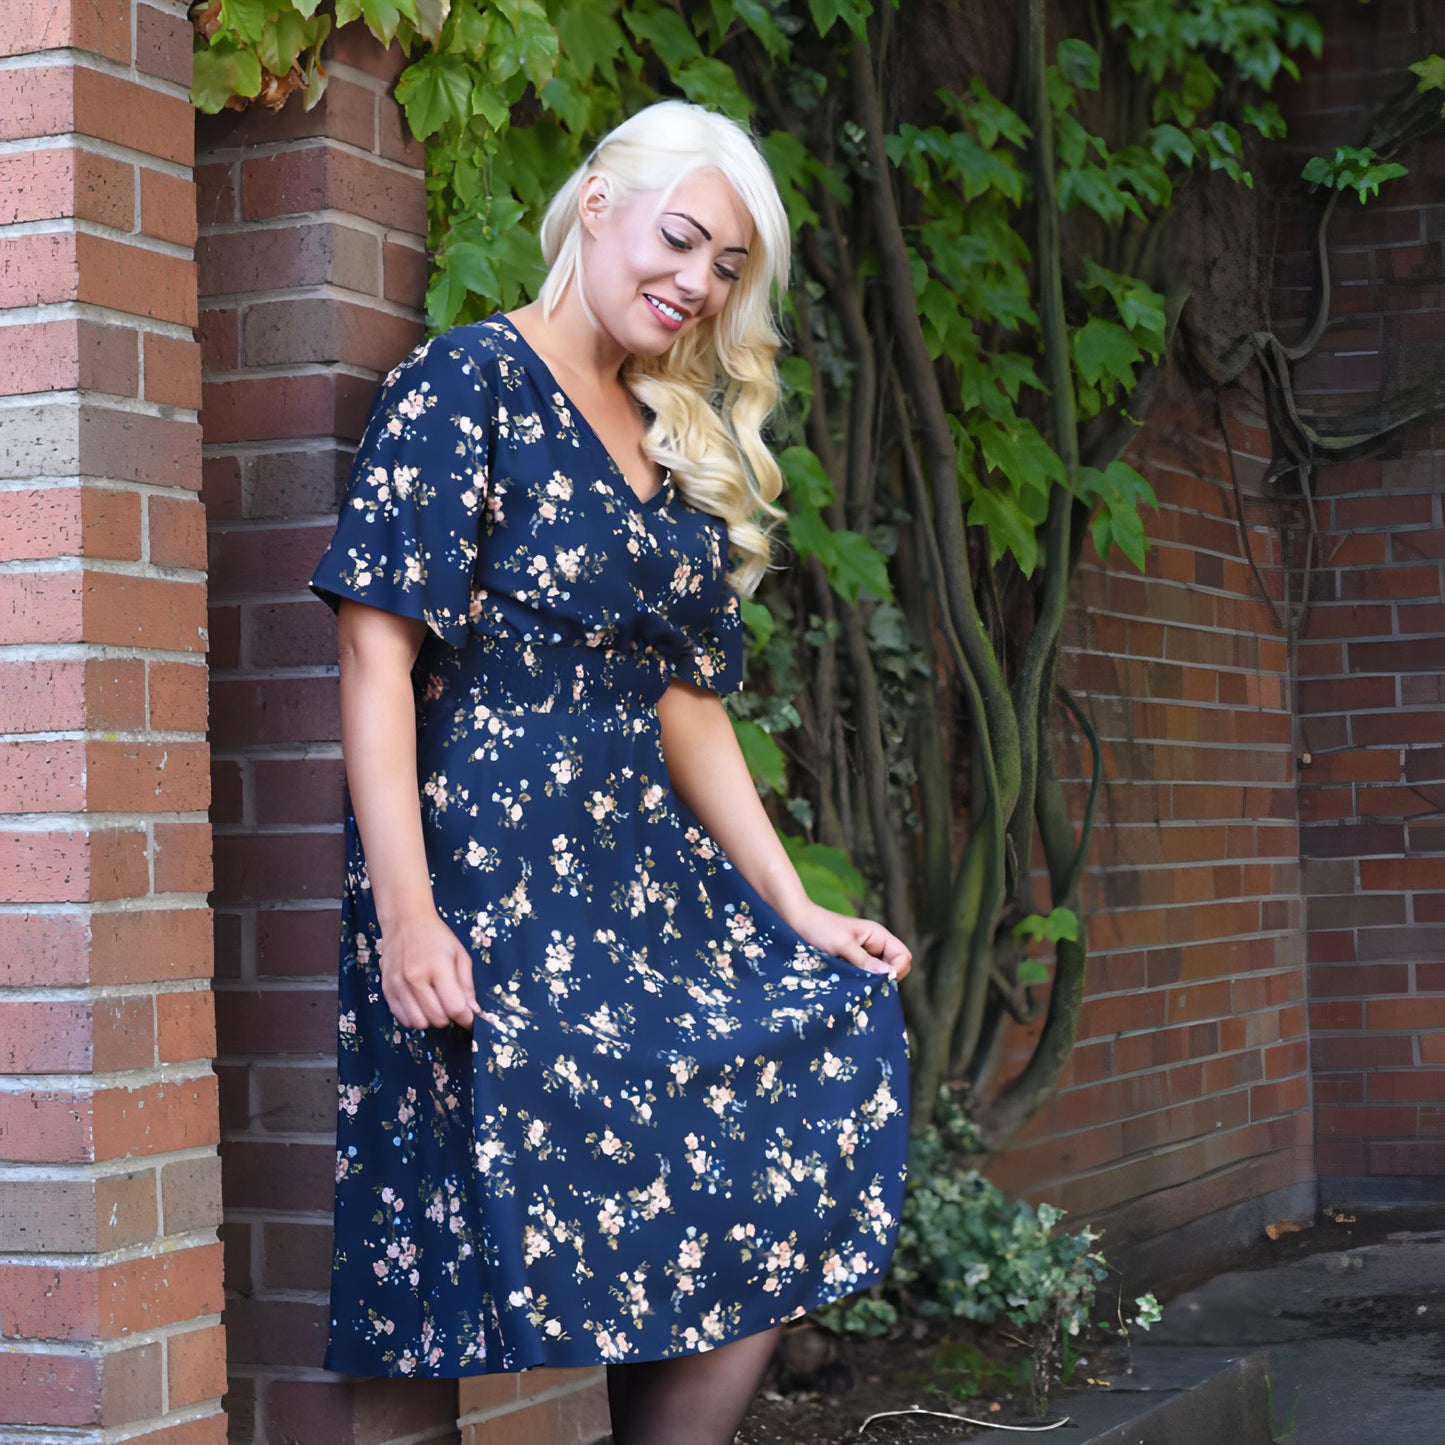 Sewing Pattern - The Olivia Dress by The Pattern Preacher